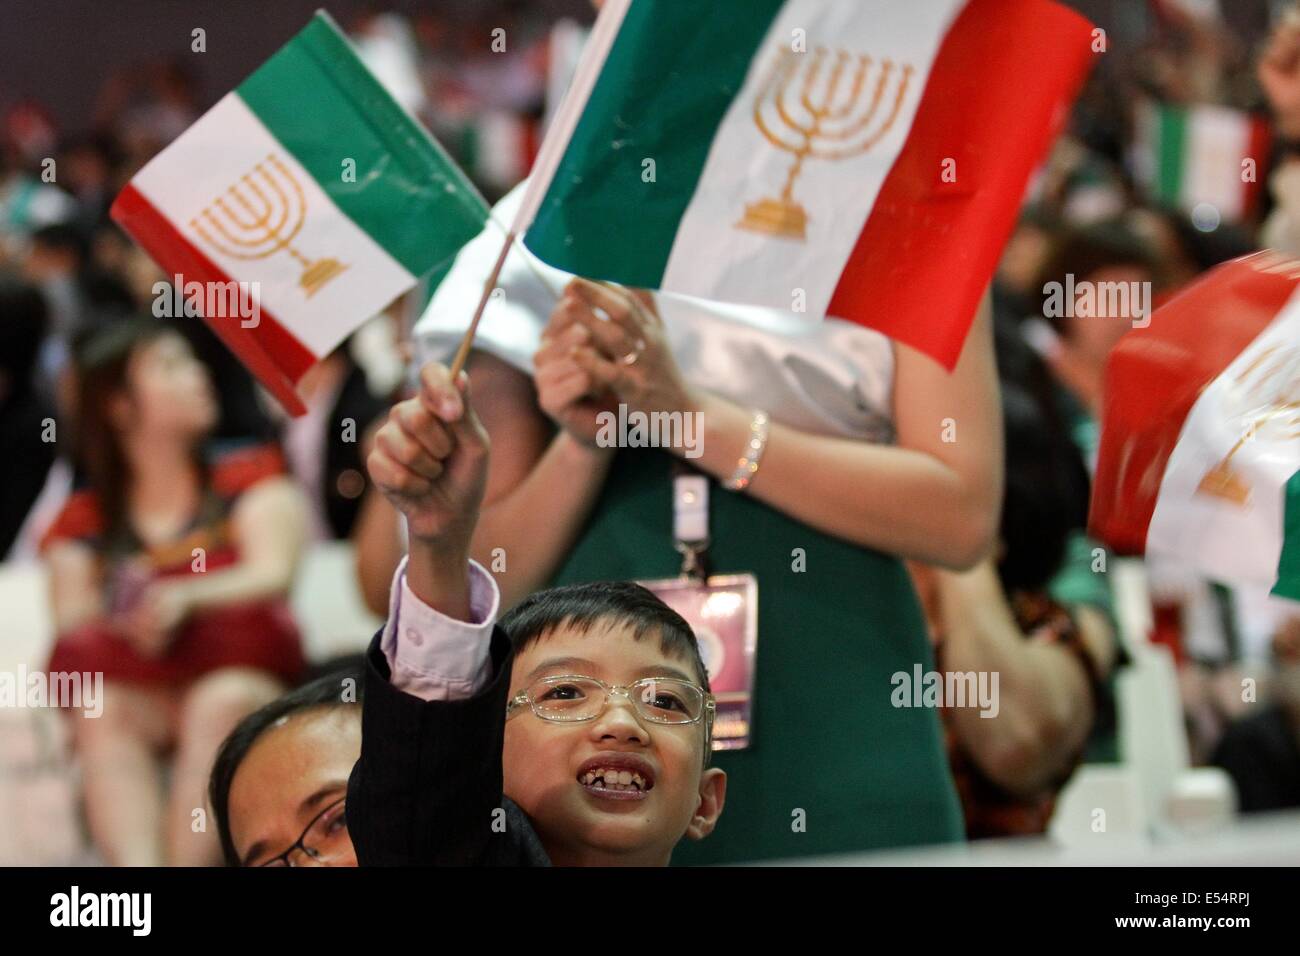 Bulacan, Philippines. 21st July, 2014. Bulacan, Philippines - A young follower of Inglesia Ni Ciristo waves his flag during the inauguration of the Philippine Arena on July 21, 2014. The inauguration of the multi-purpose complex was lead by Inglesia Ni Cristo Executive Minister Brother Eduardo V. Manalo and President Benigno Aquino III. The Philippine Arena, touted as the world's largest domed arena with a 55,000 seating capacity whose construction cost over $200 million is built to withstand strong earthquakes and super typhoon winds. Credit:  ZUMA Press, Inc./Alamy Live News Stock Photo